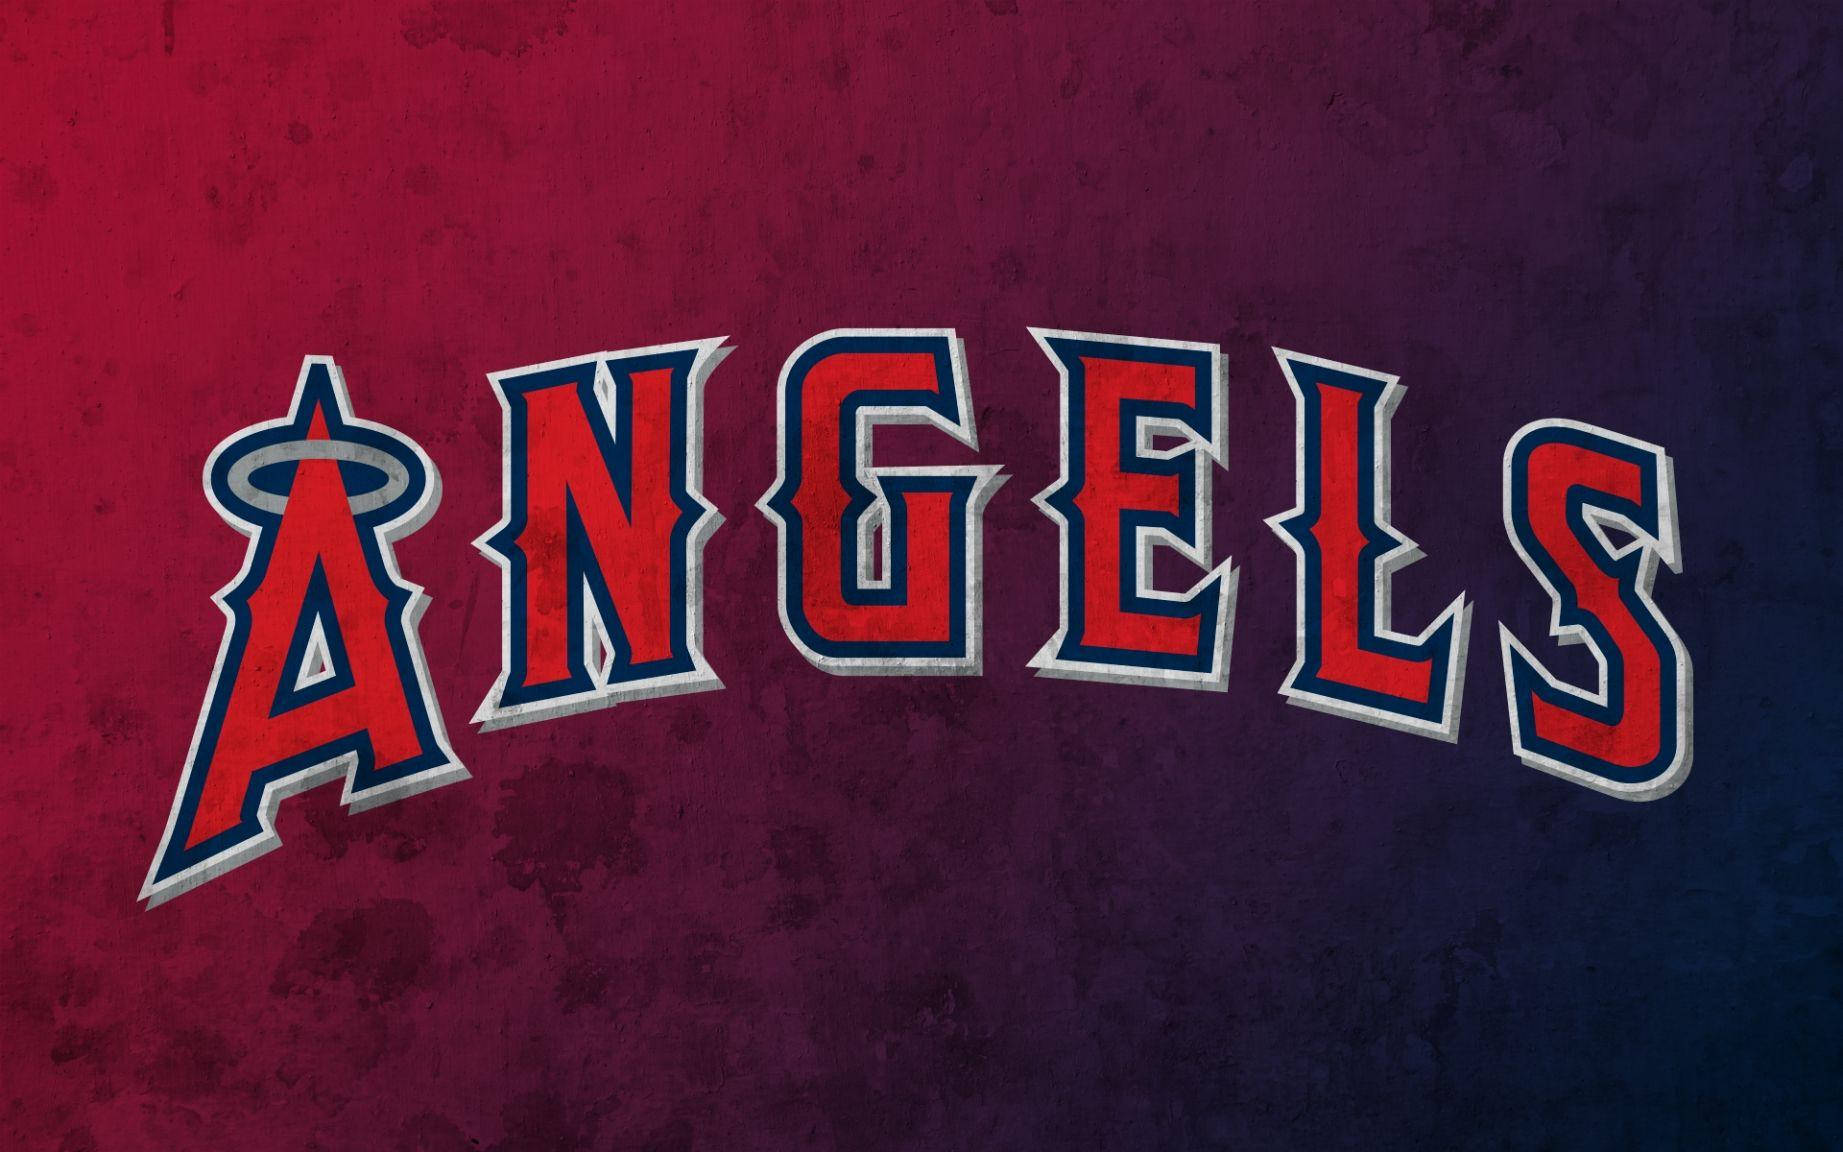 Los Angeles Angels Logo On Red And Blue Wallpaper